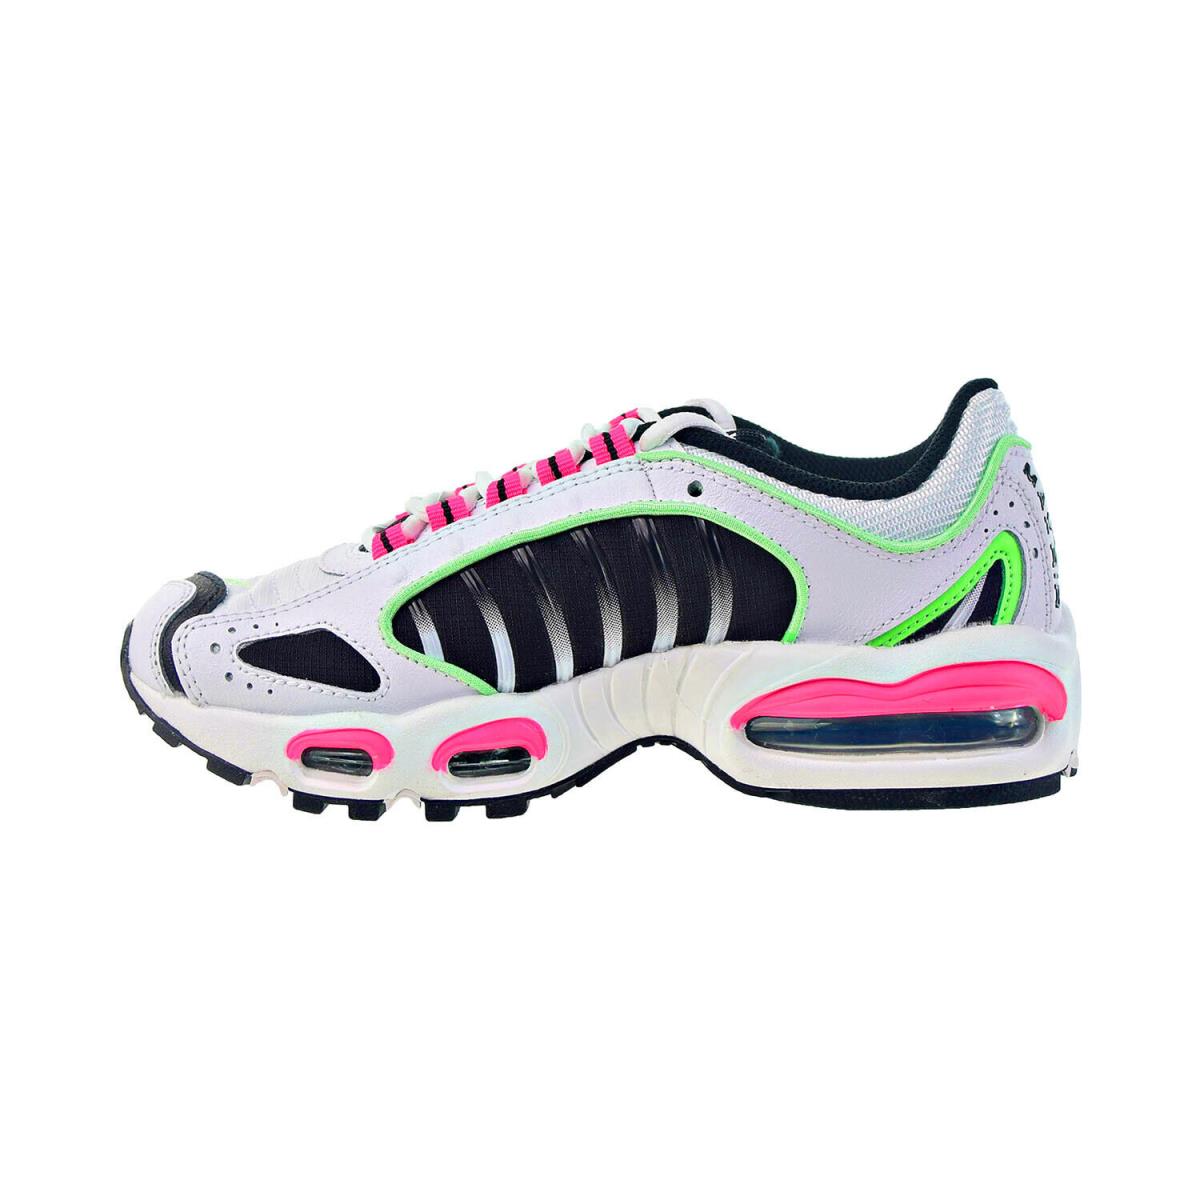 Nike shoes Air Max Tailwind - White/Hyper Pink 0